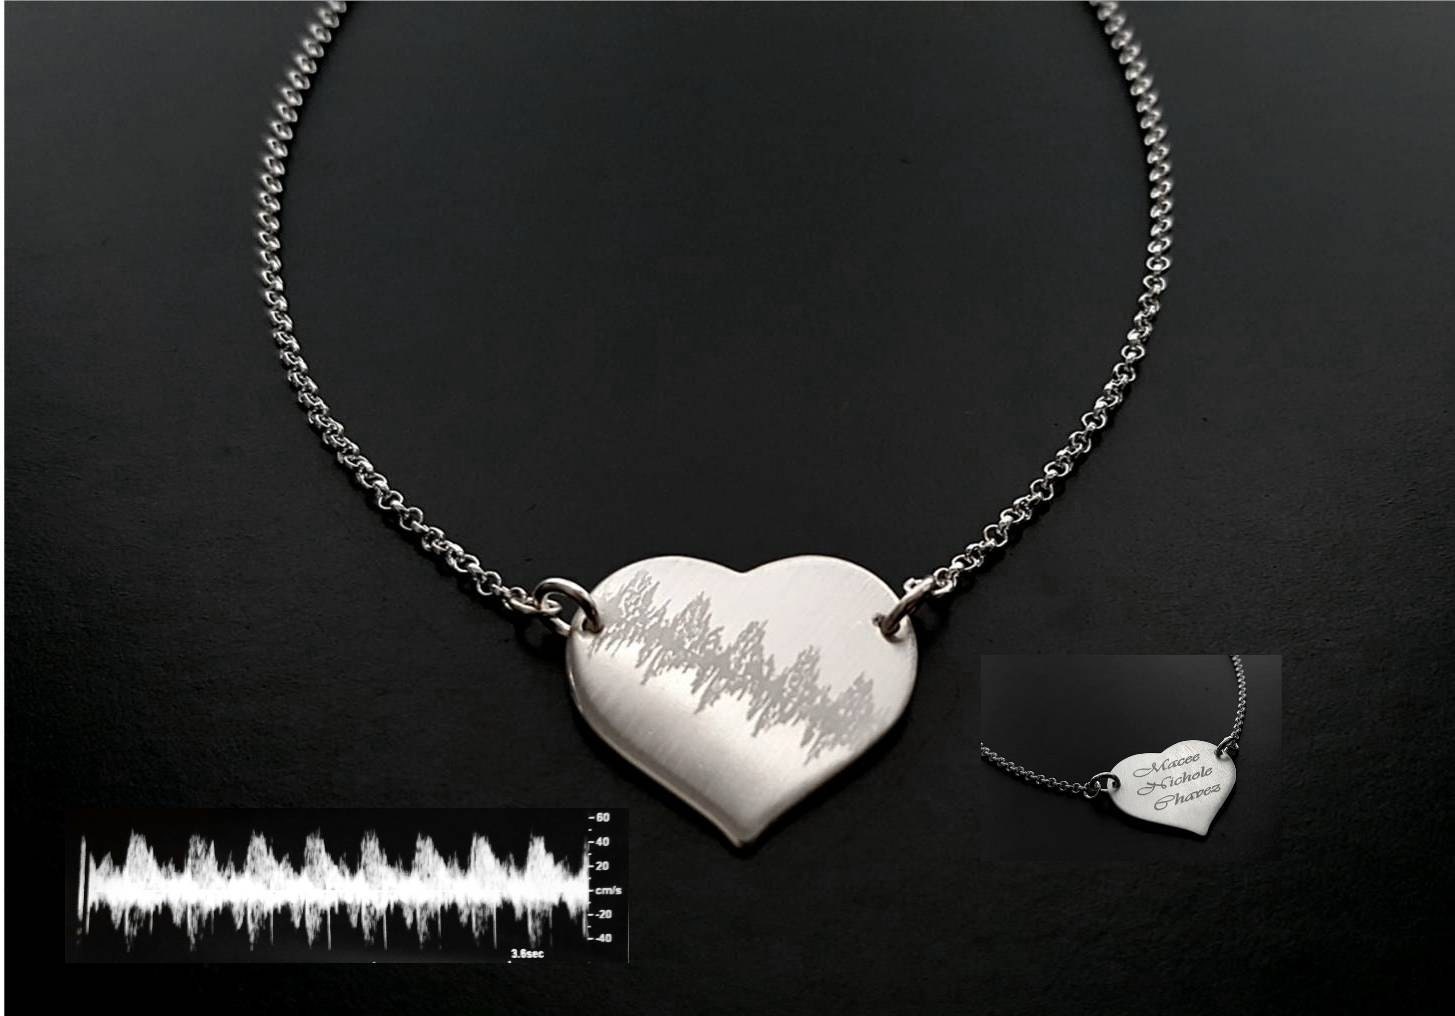 heartbeat necklace with ruby heart